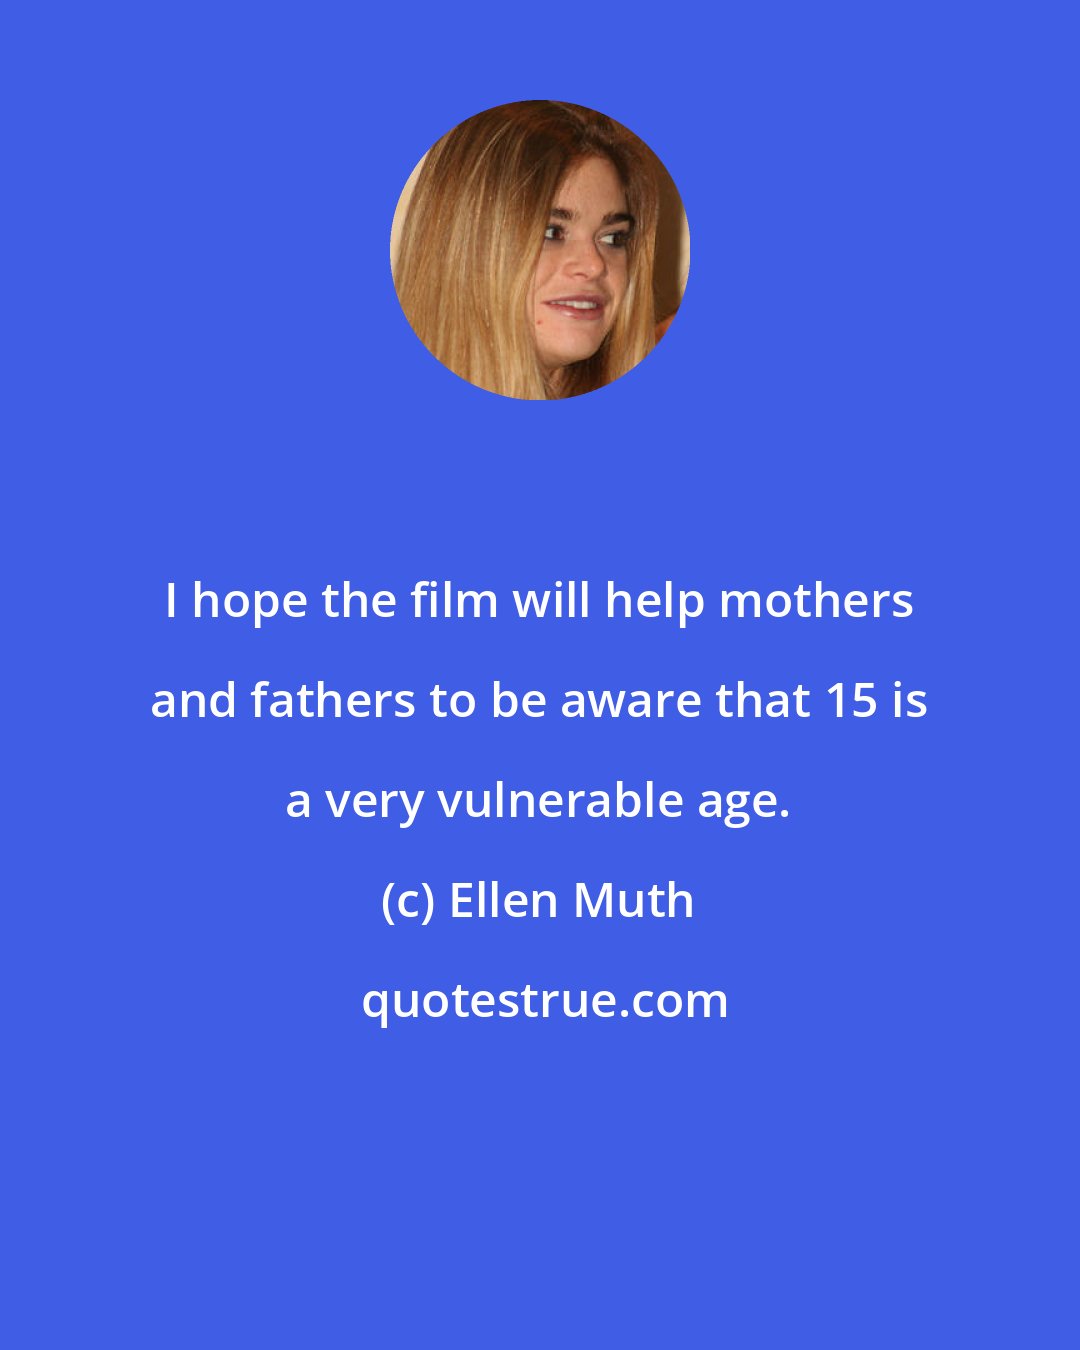 Ellen Muth: I hope the film will help mothers and fathers to be aware that 15 is a very vulnerable age.